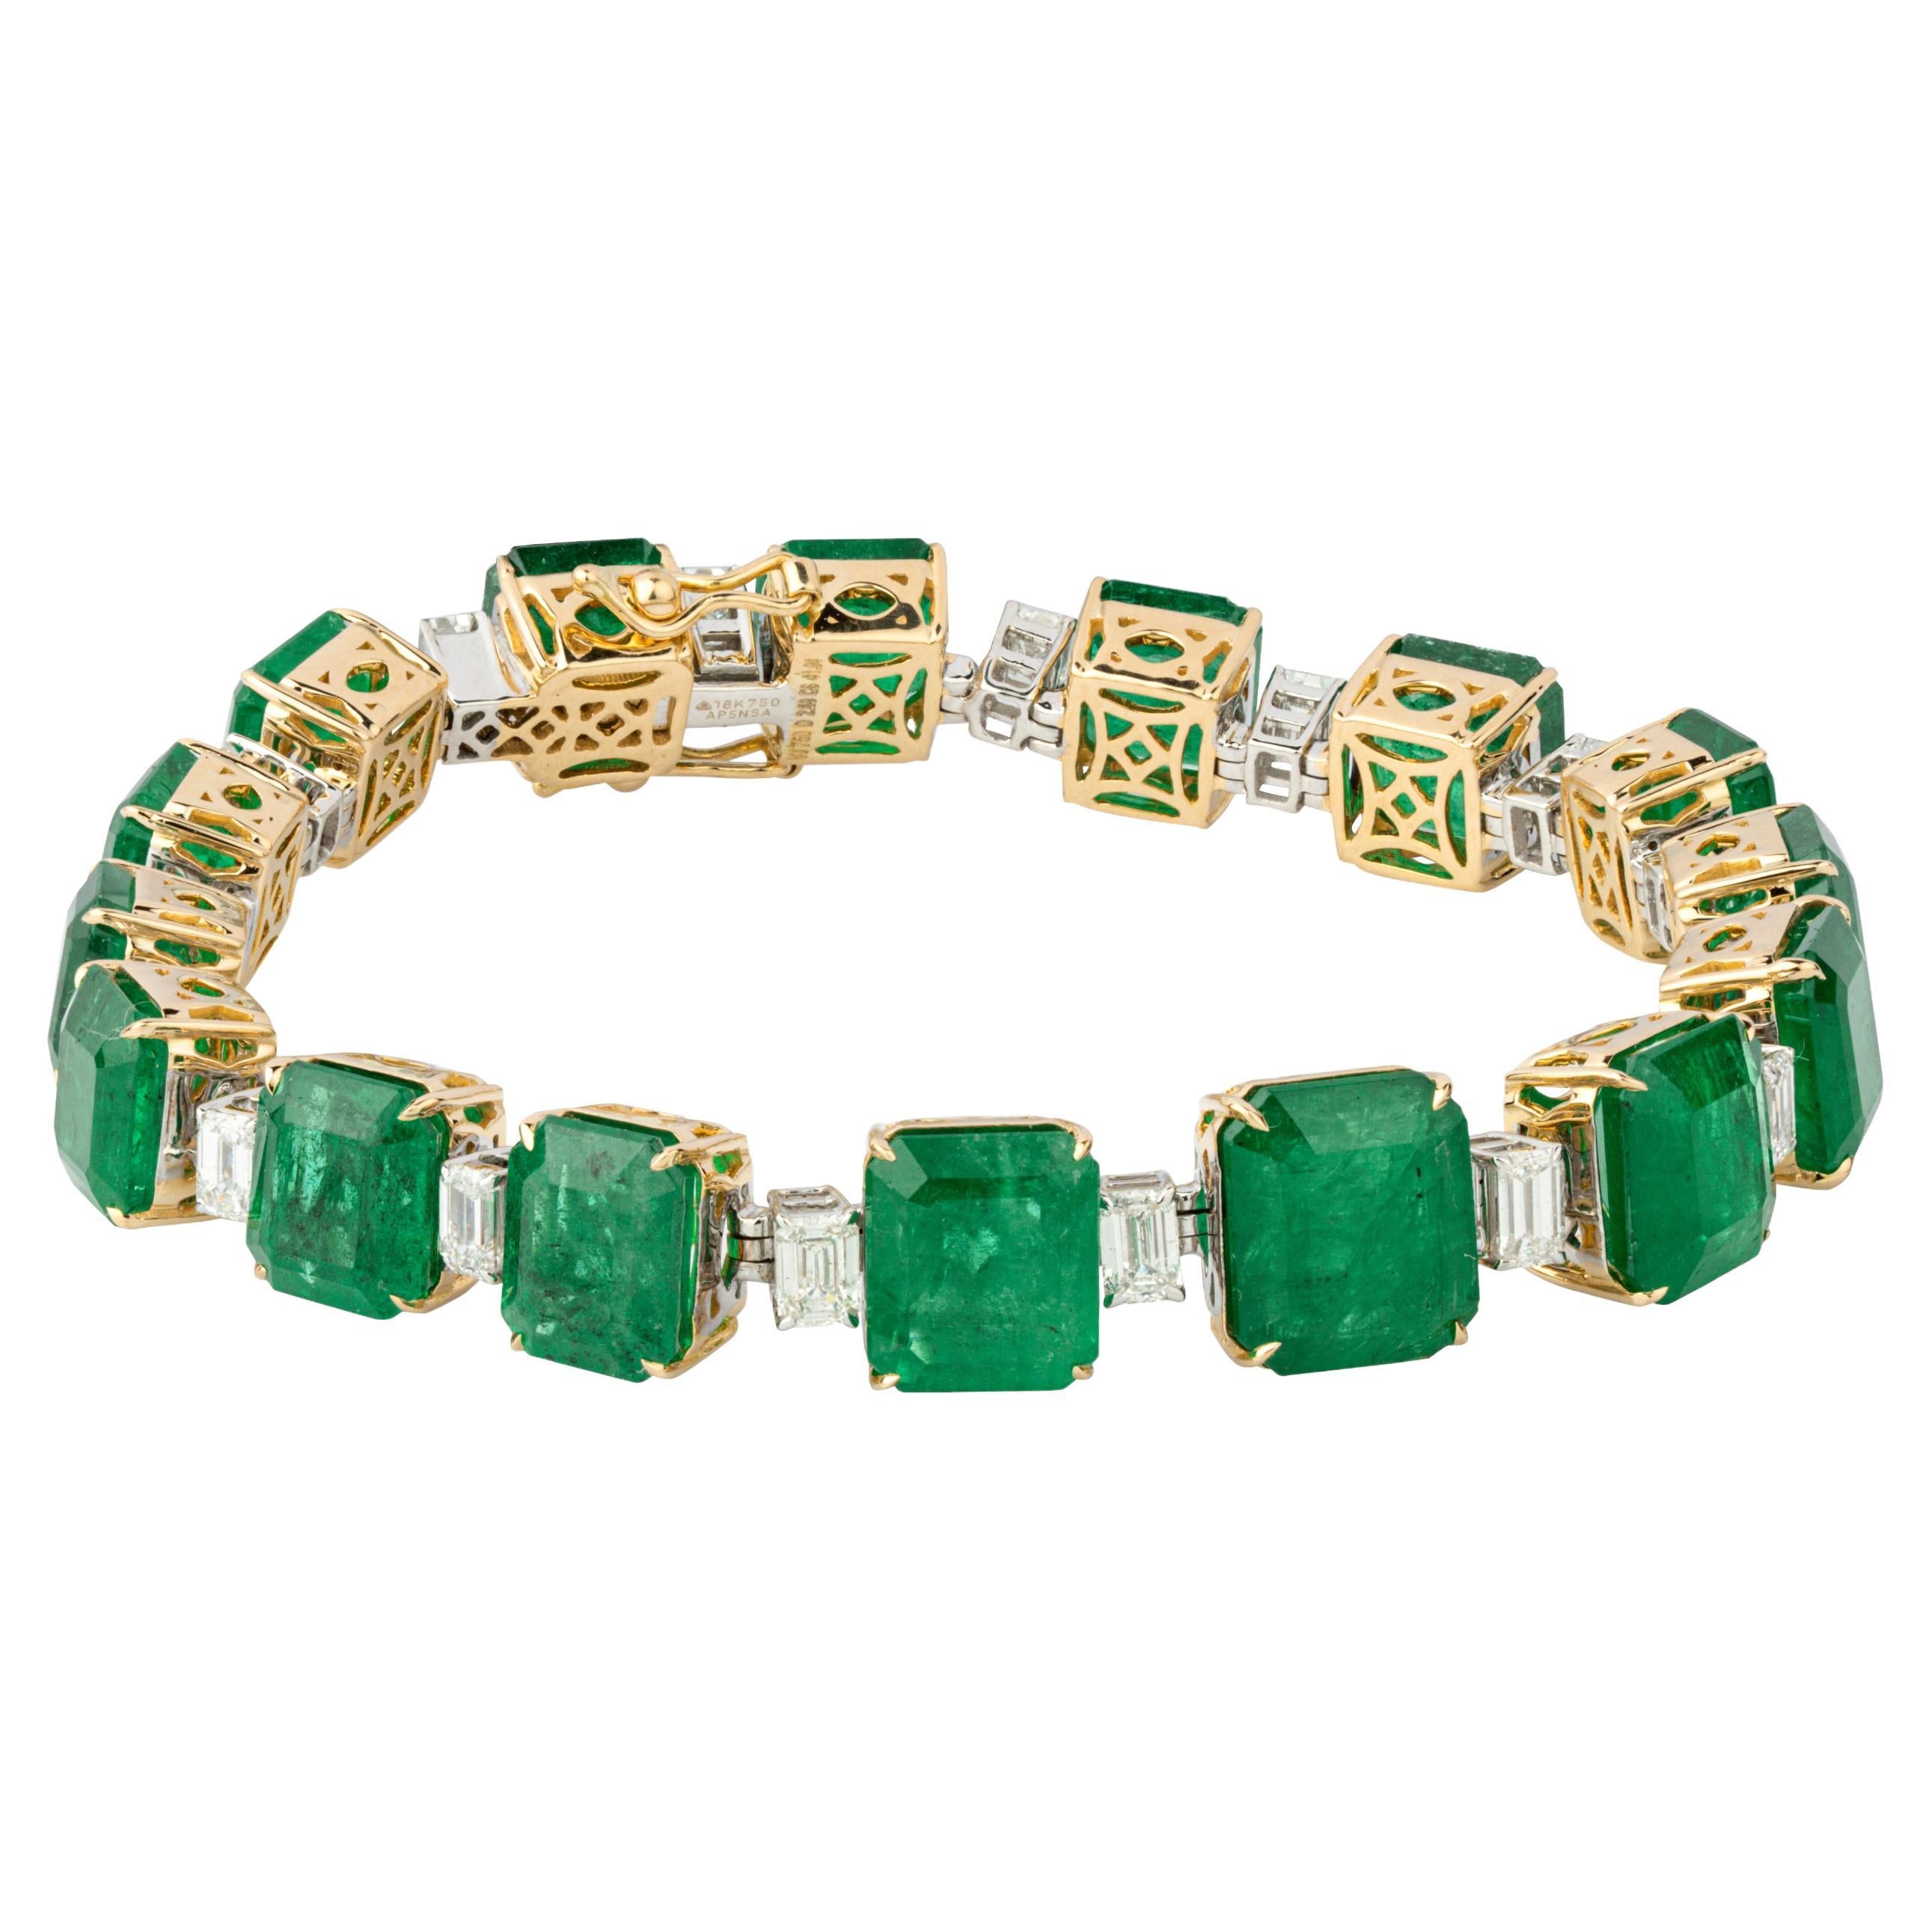 Natural emerald and natural diamond bracelet in 18k gold